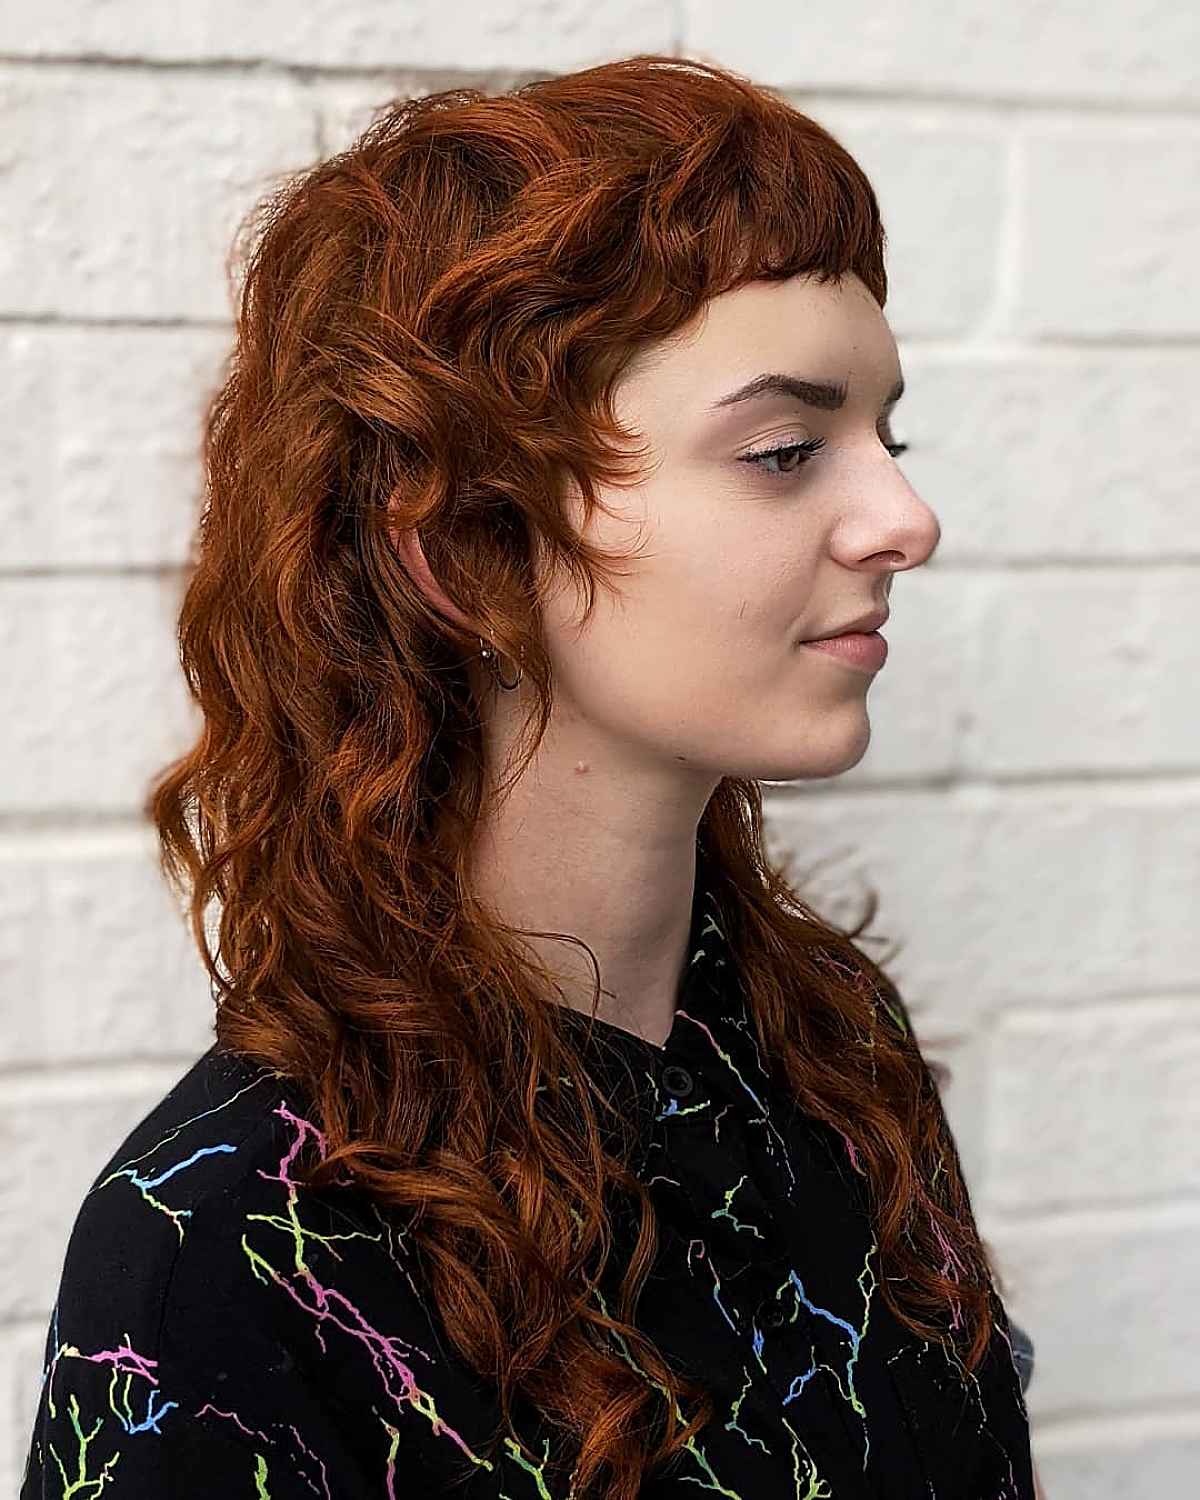 Mullet for Curly, Long Hair